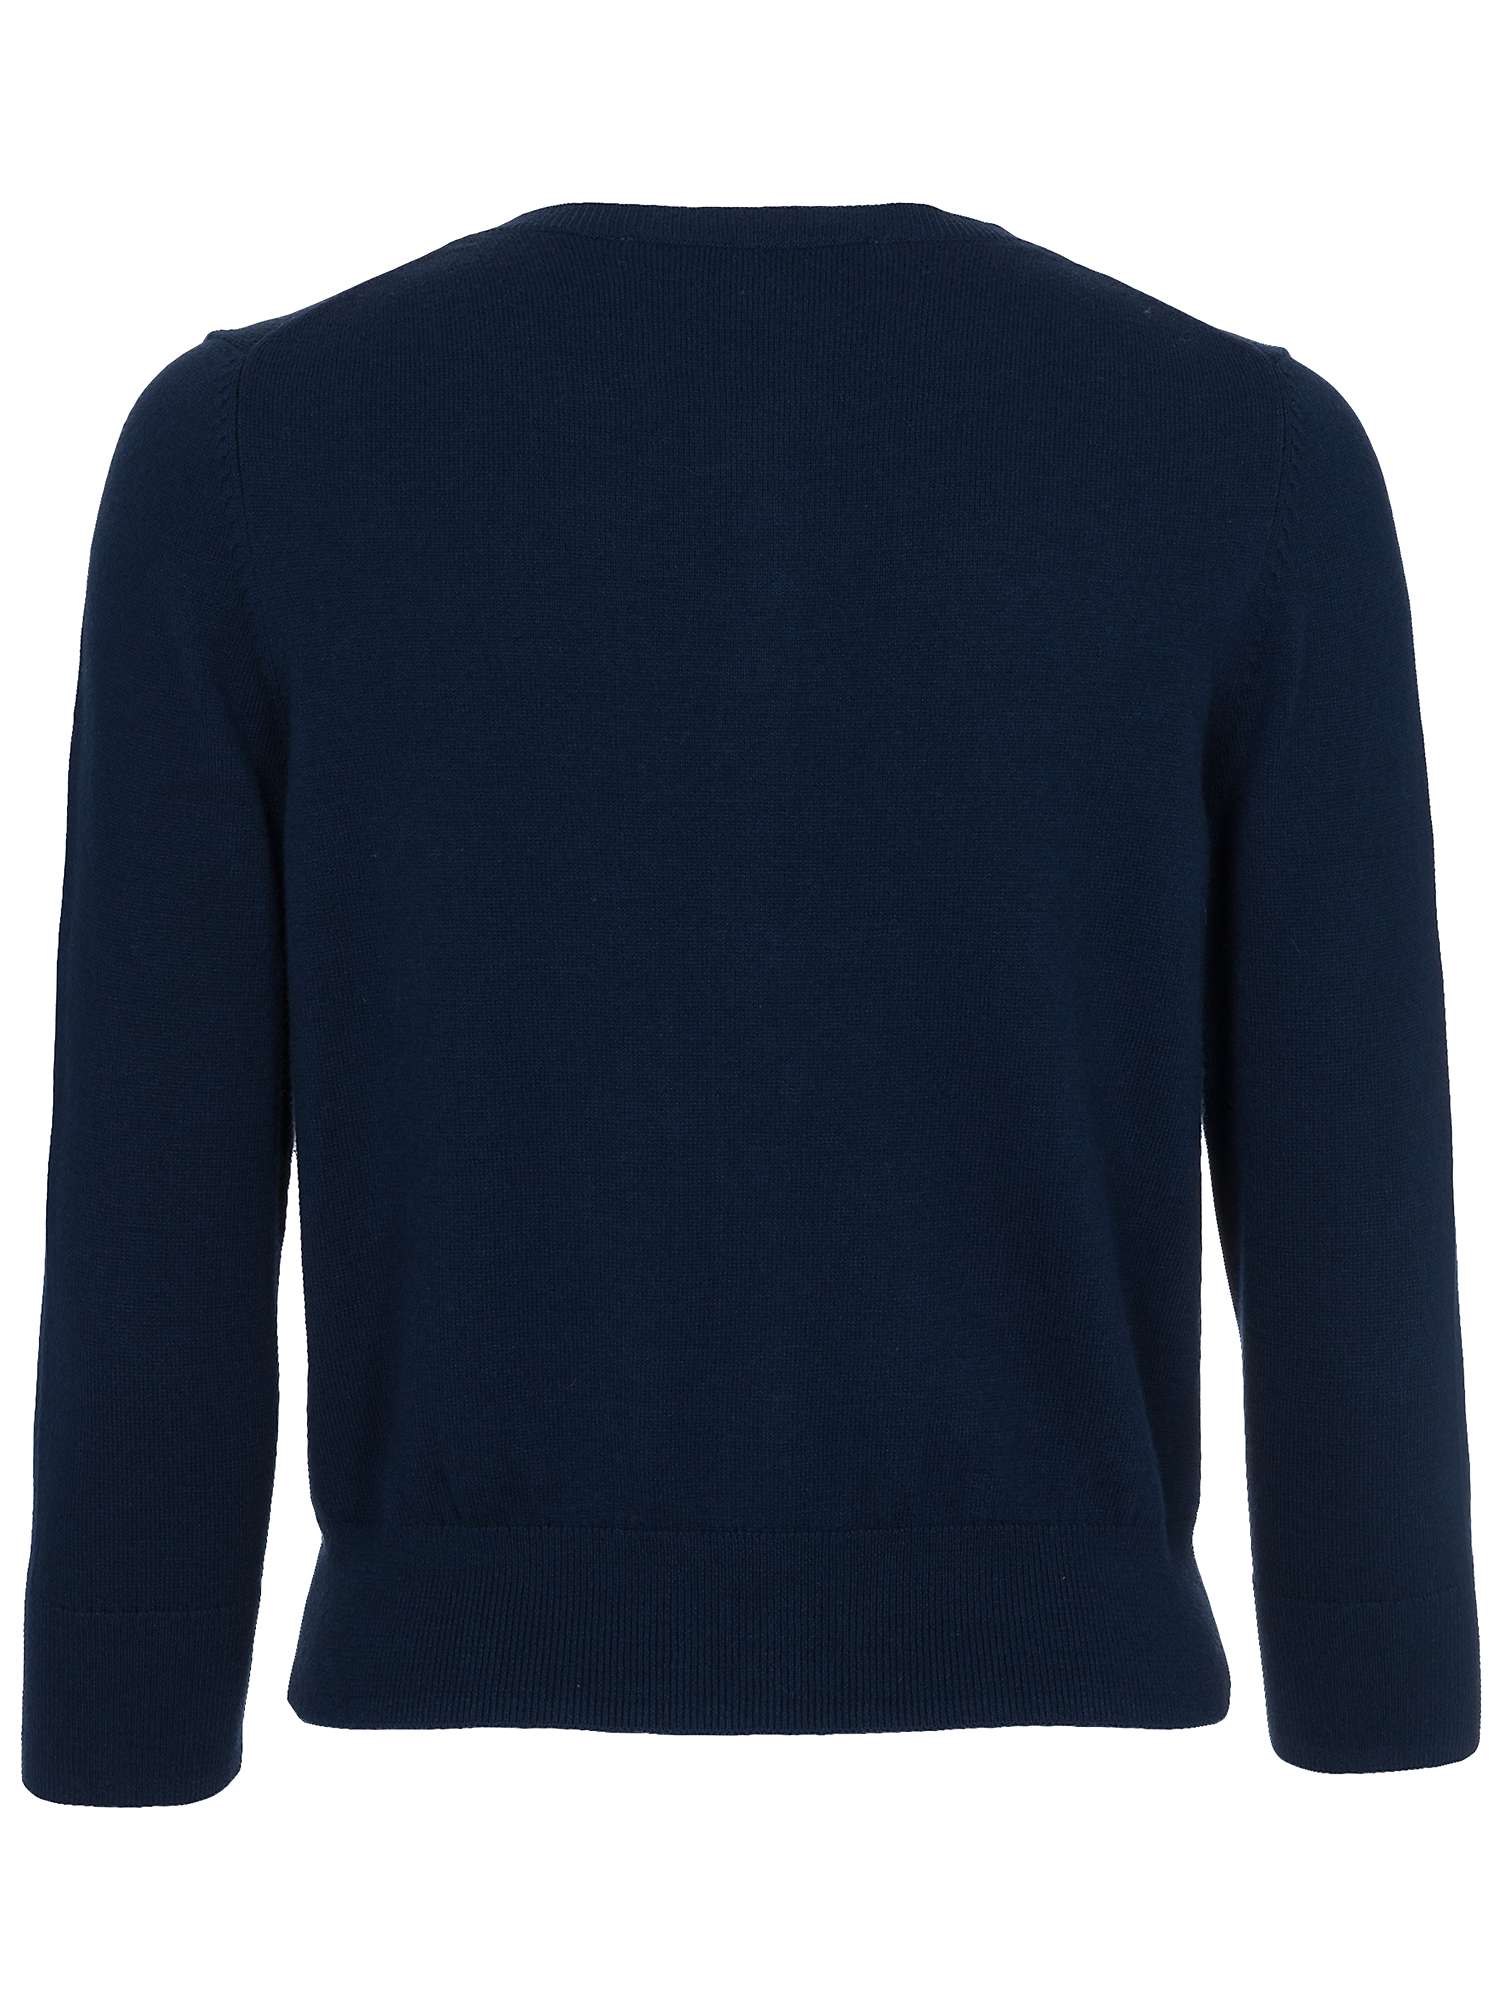 Buy French Connection Spring Bambino Cardigan Online at johnlewis.com